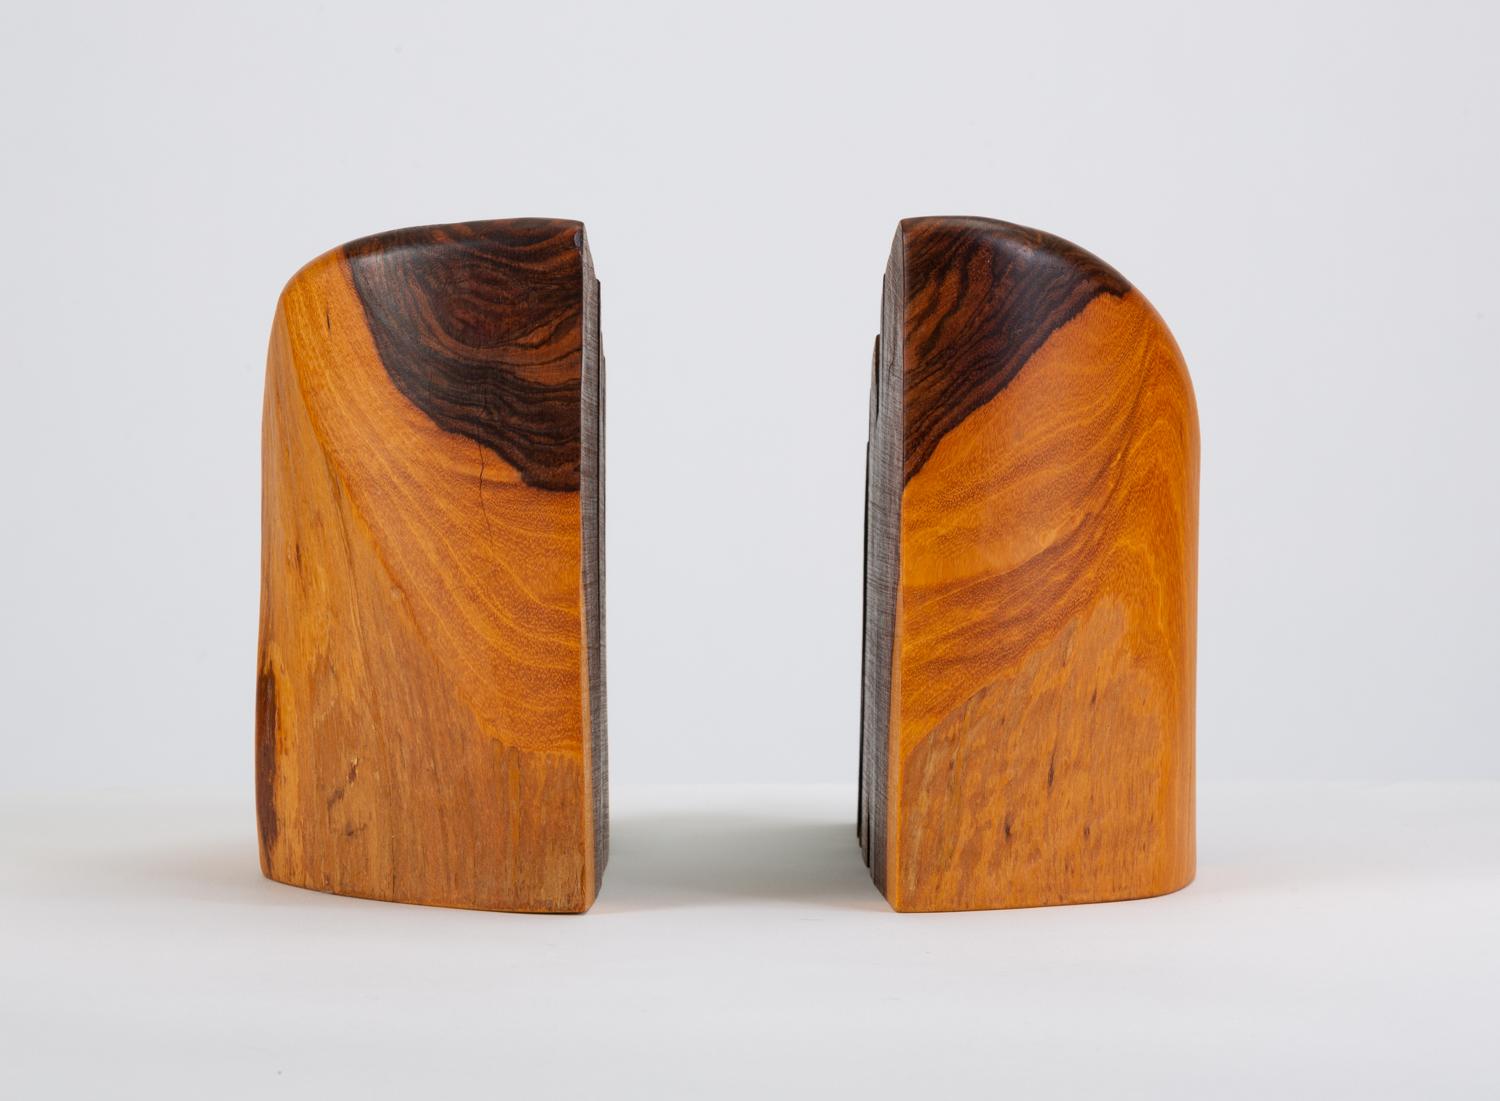 20th Century Pair of Bookends with Sapwood Figuring by Don Shoemaker for Señal